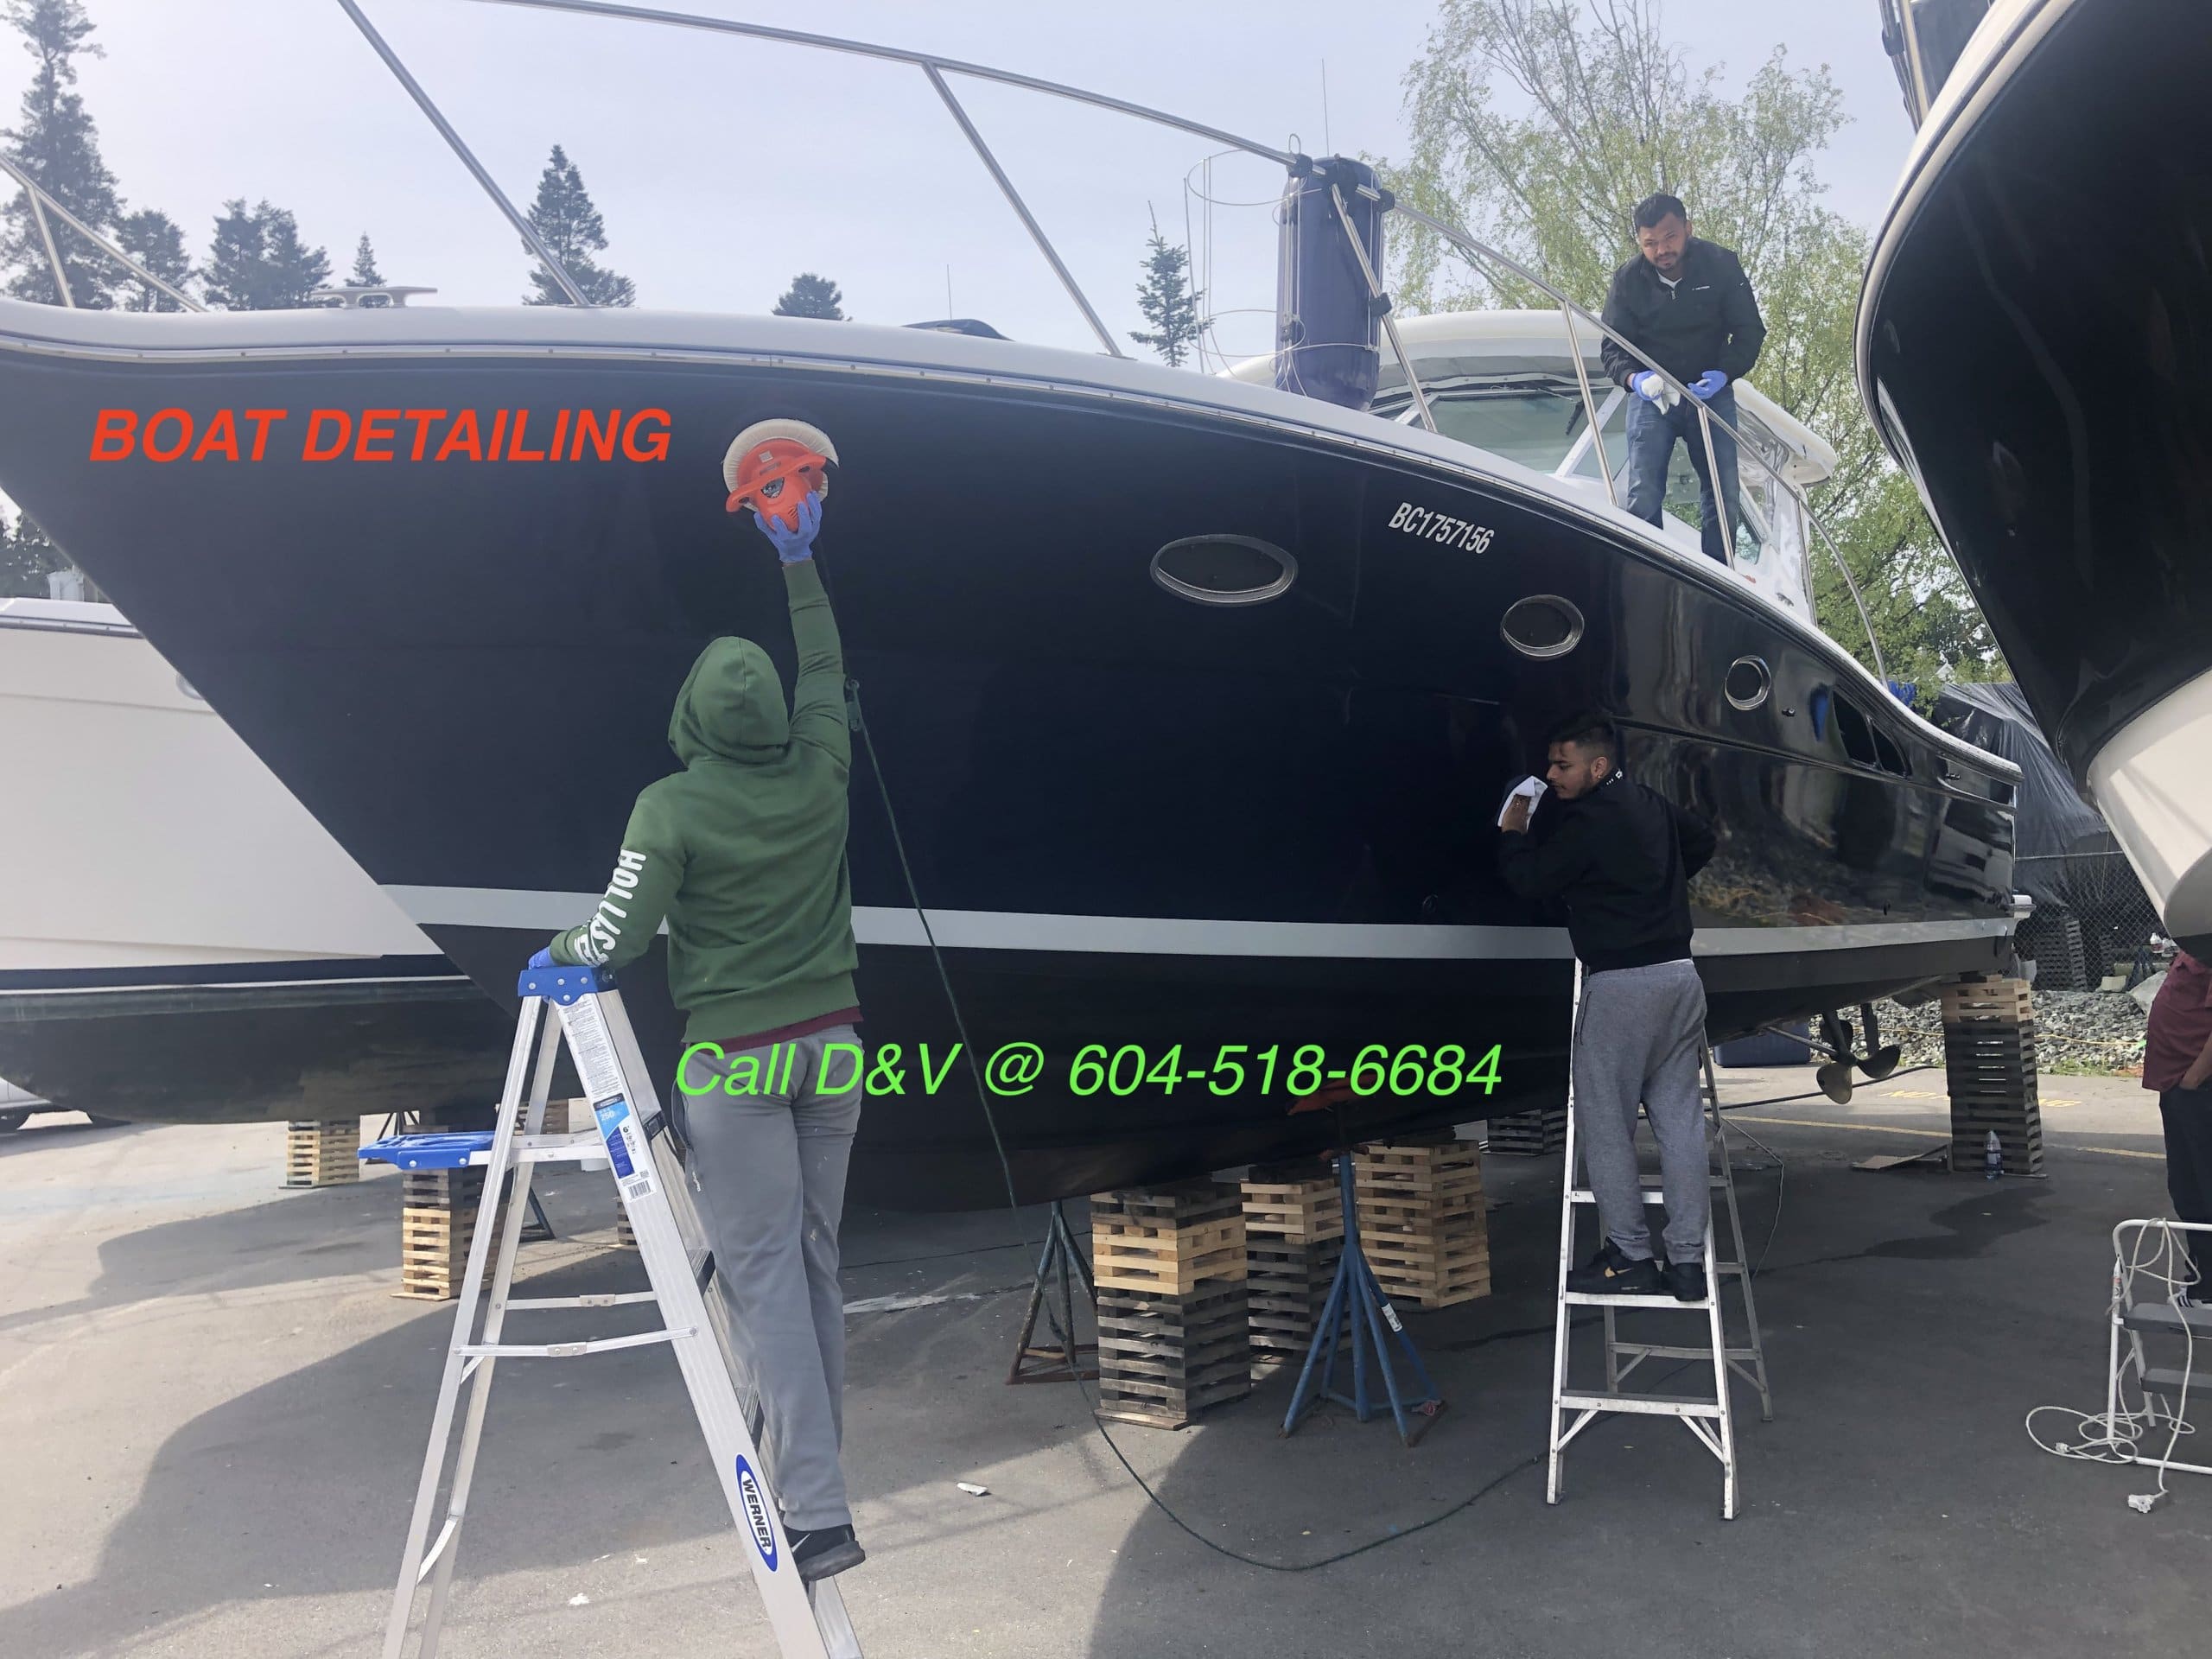 picture showing boat exterior detailing service